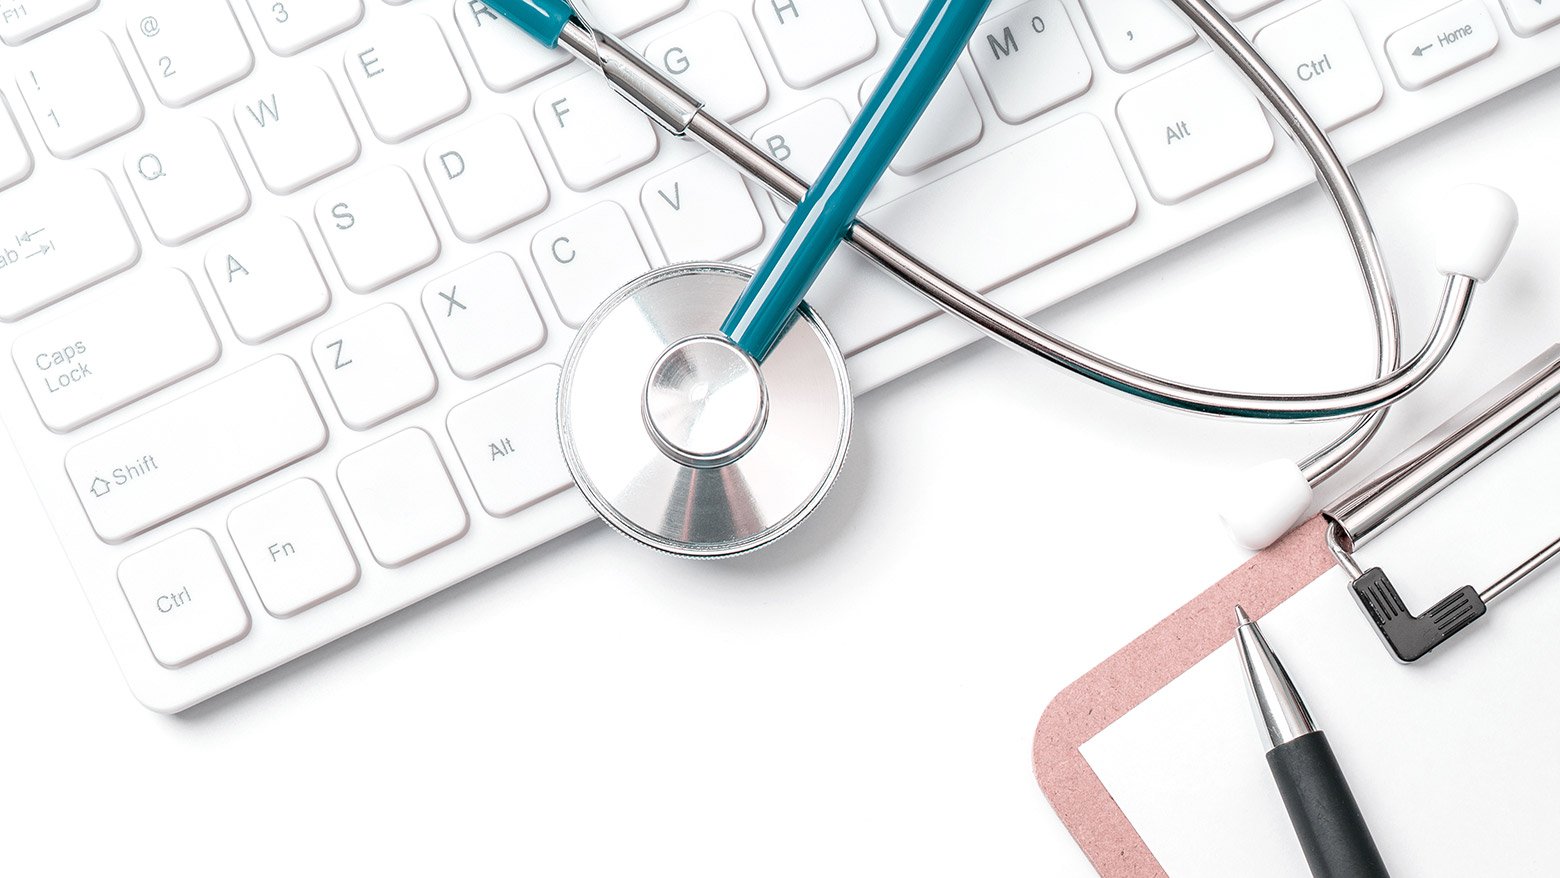 A stethoscope on top of a keyboard and a pen on top of a clipboard